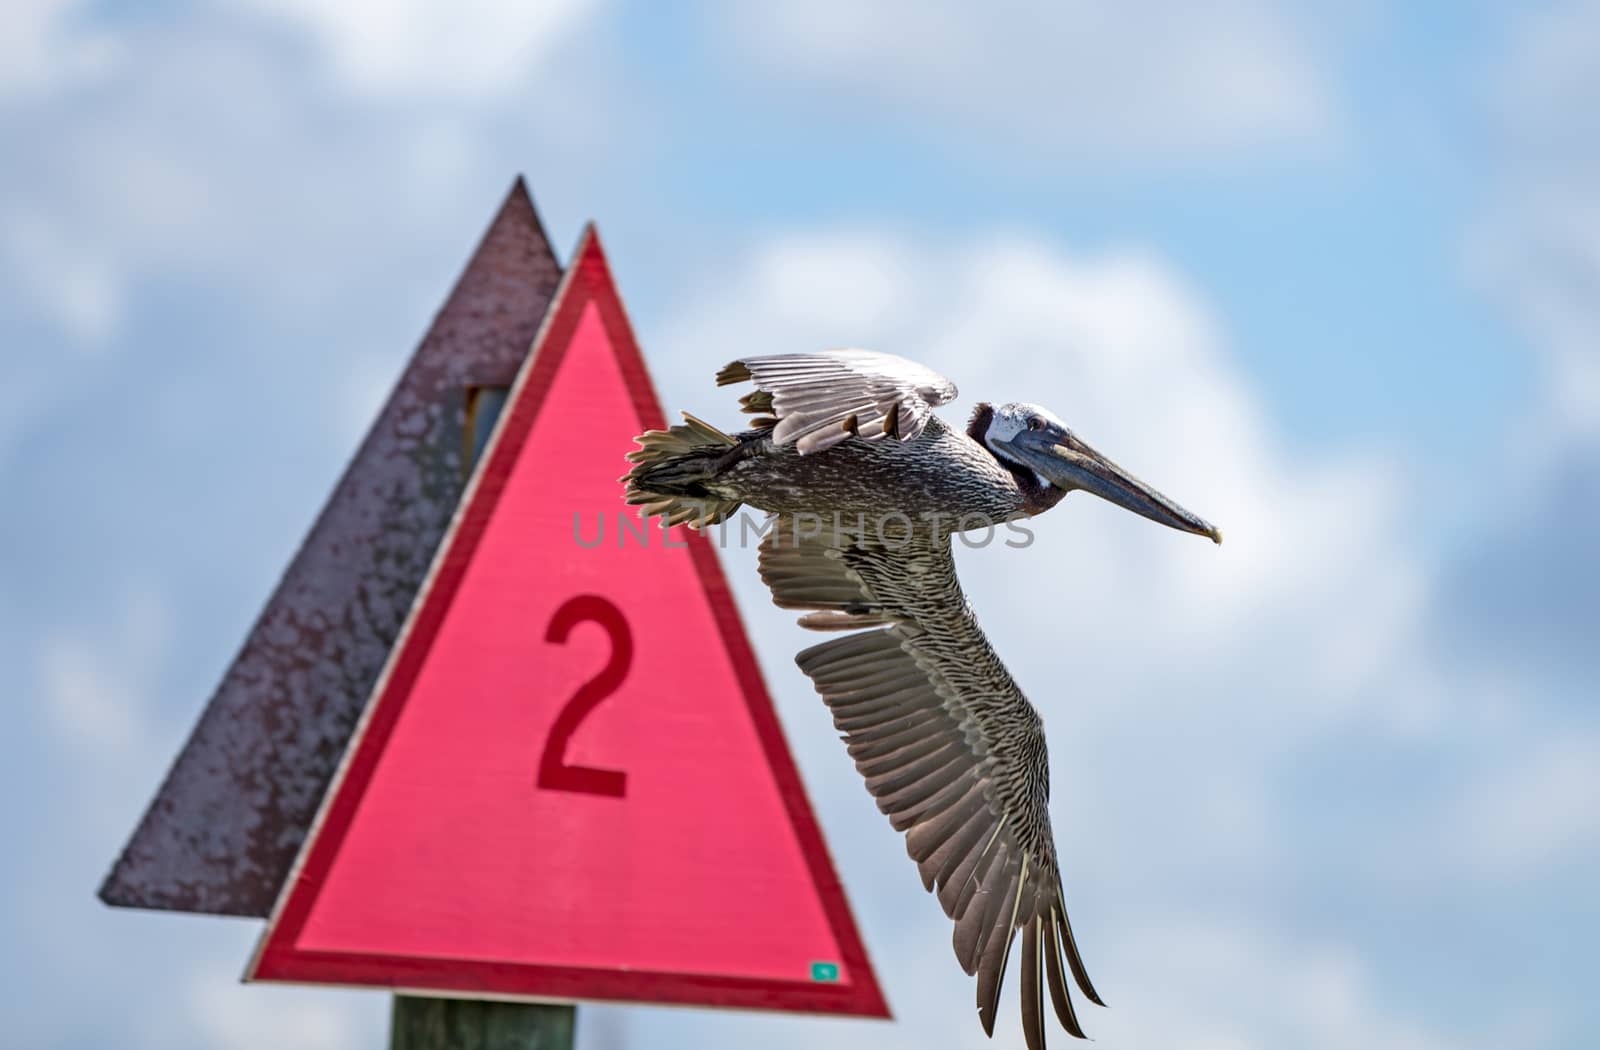 Pelicans ignore signs by thomas_males